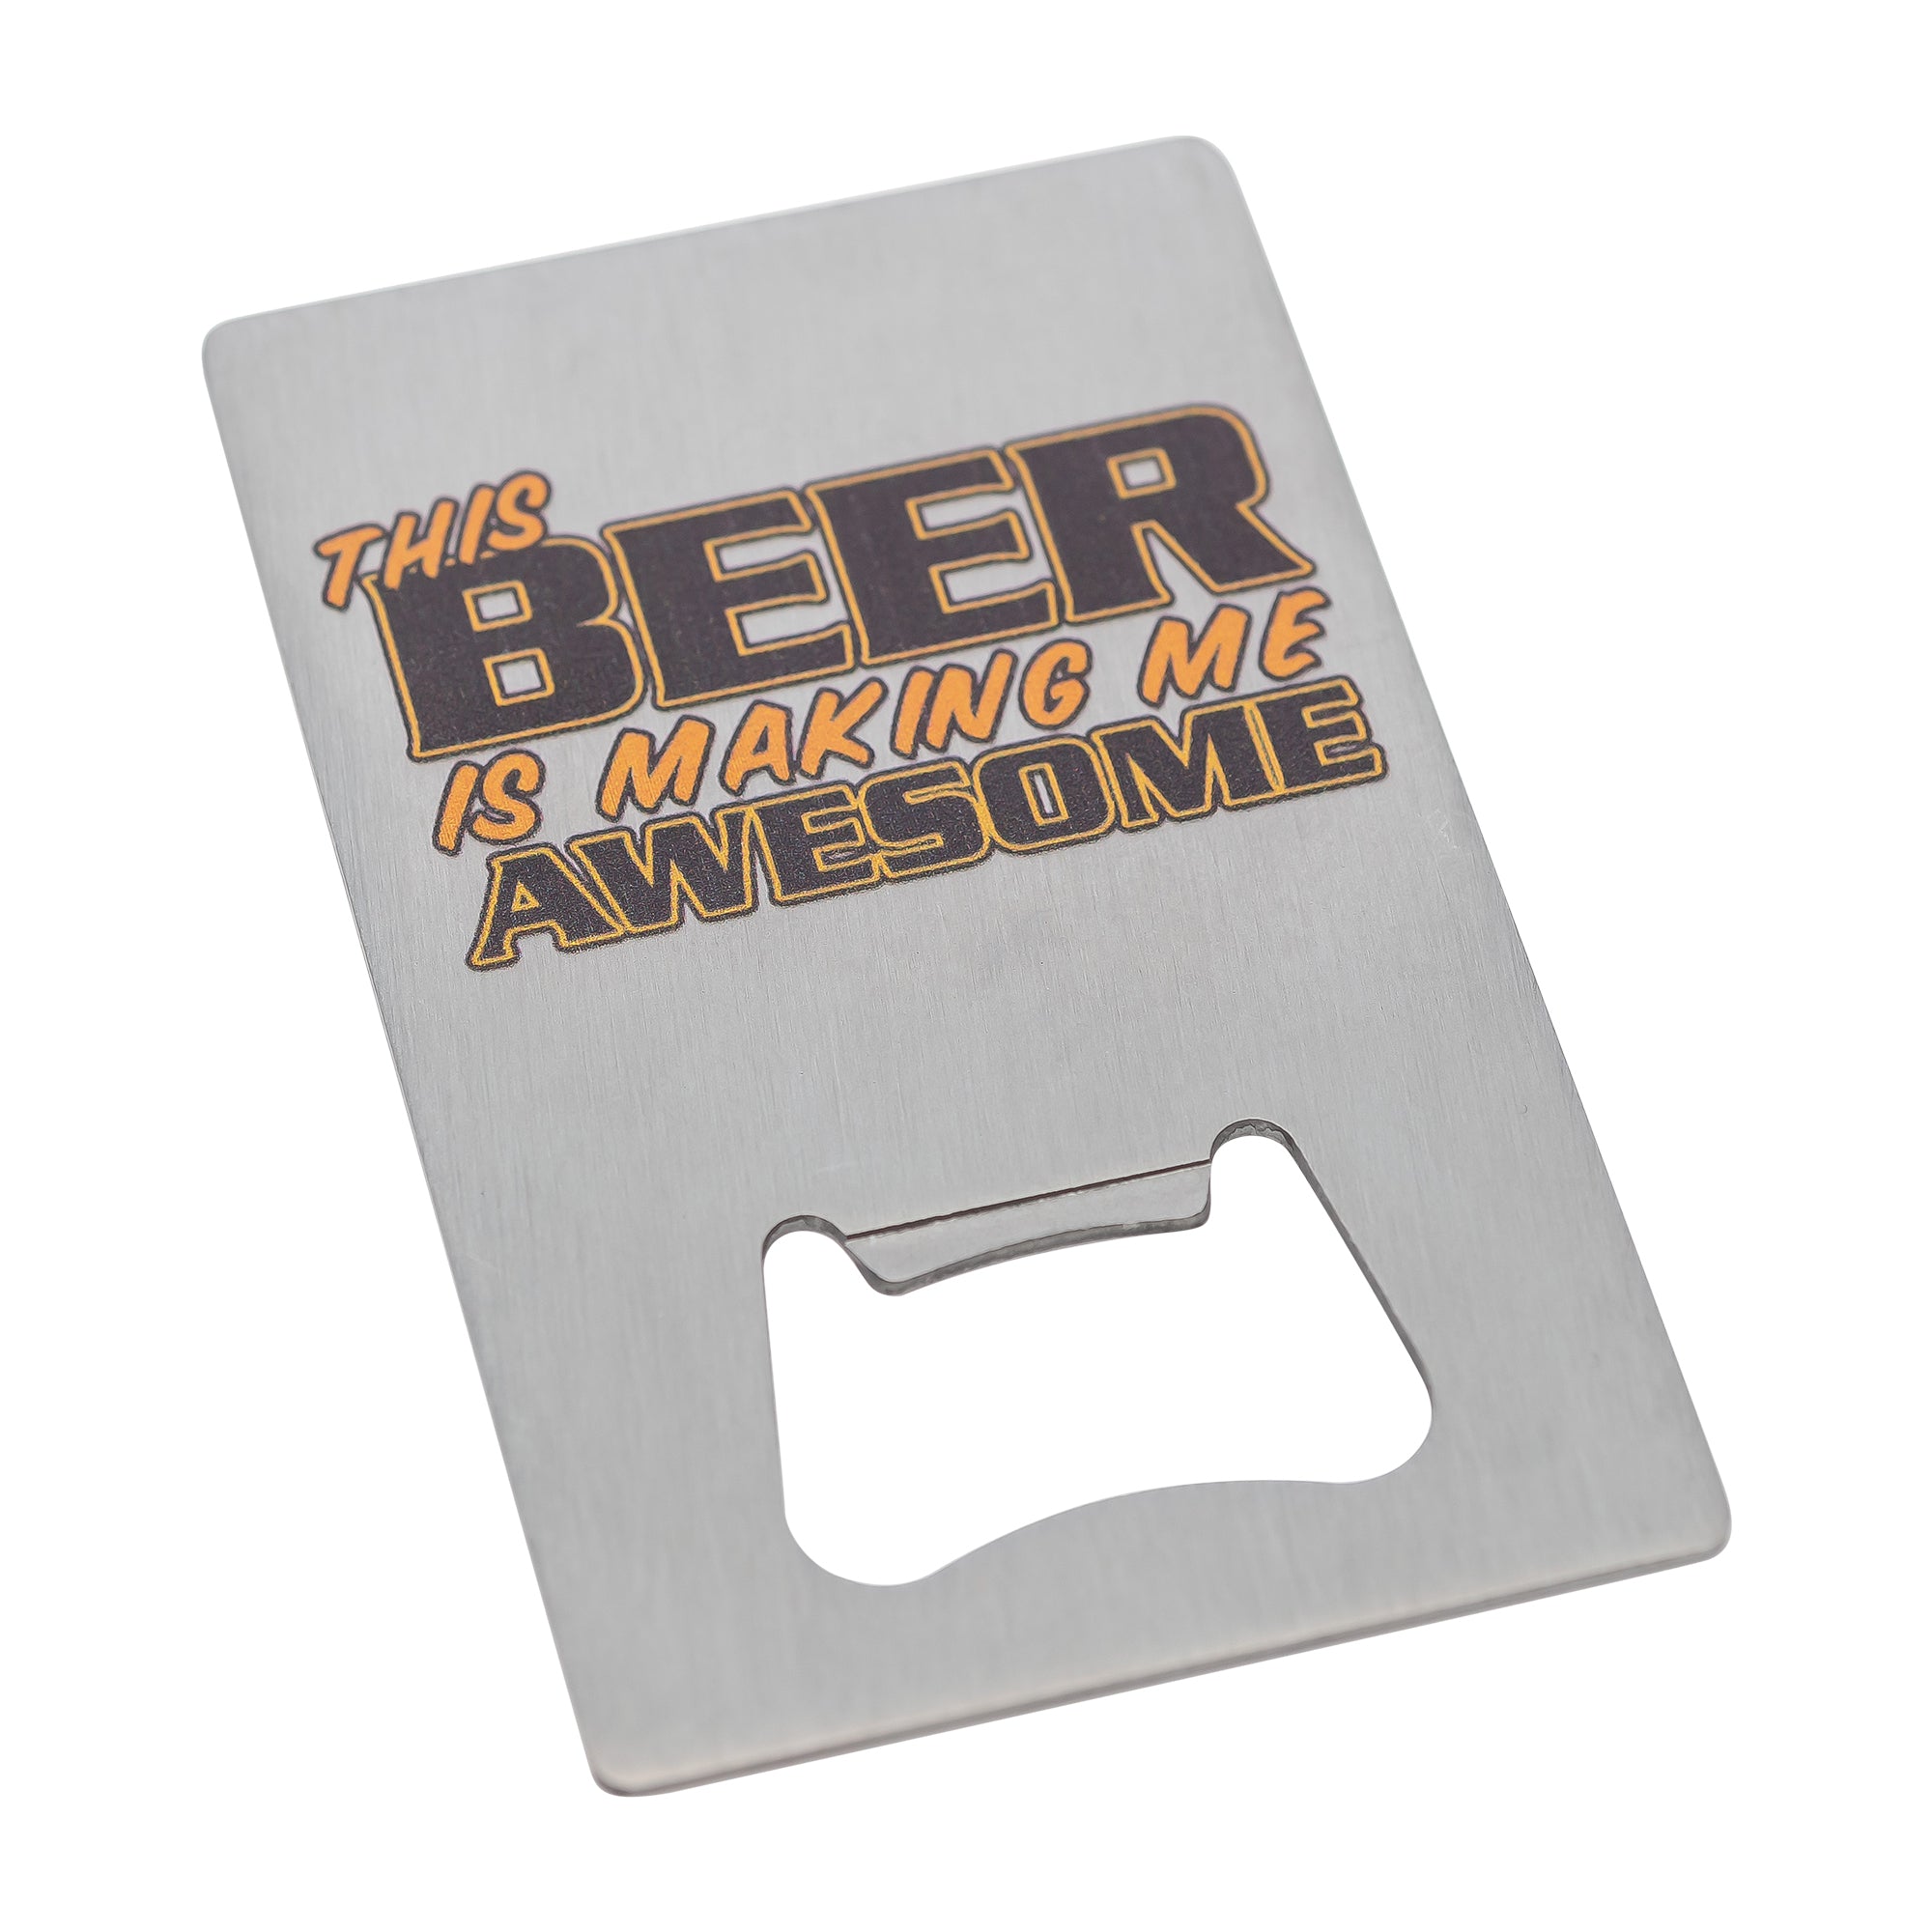 Beer Me Collection - Beer Awesome